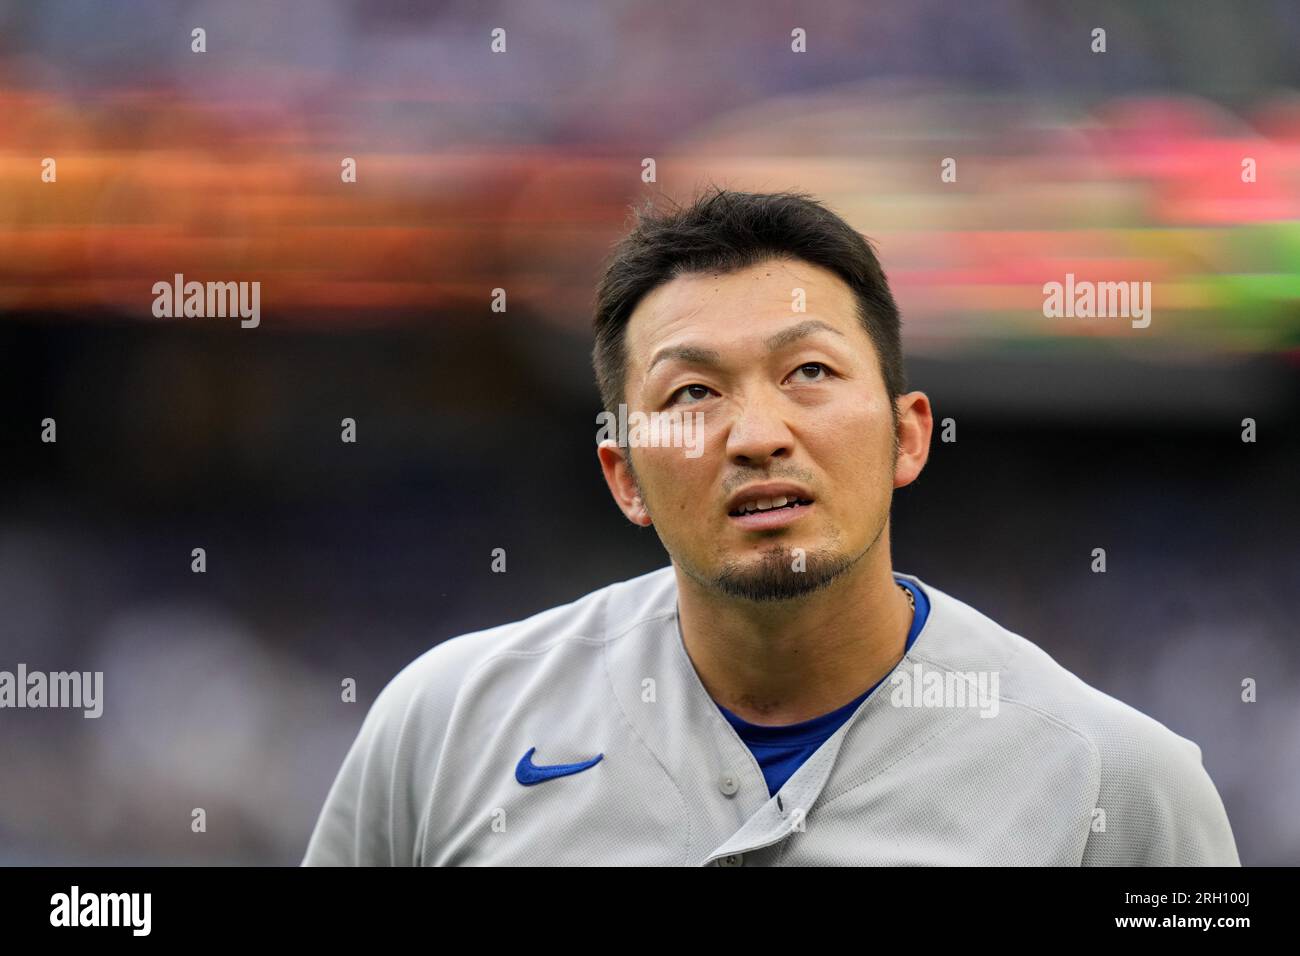 Seiya Suzuki of the Chicago Cubs is pictured during a baseball